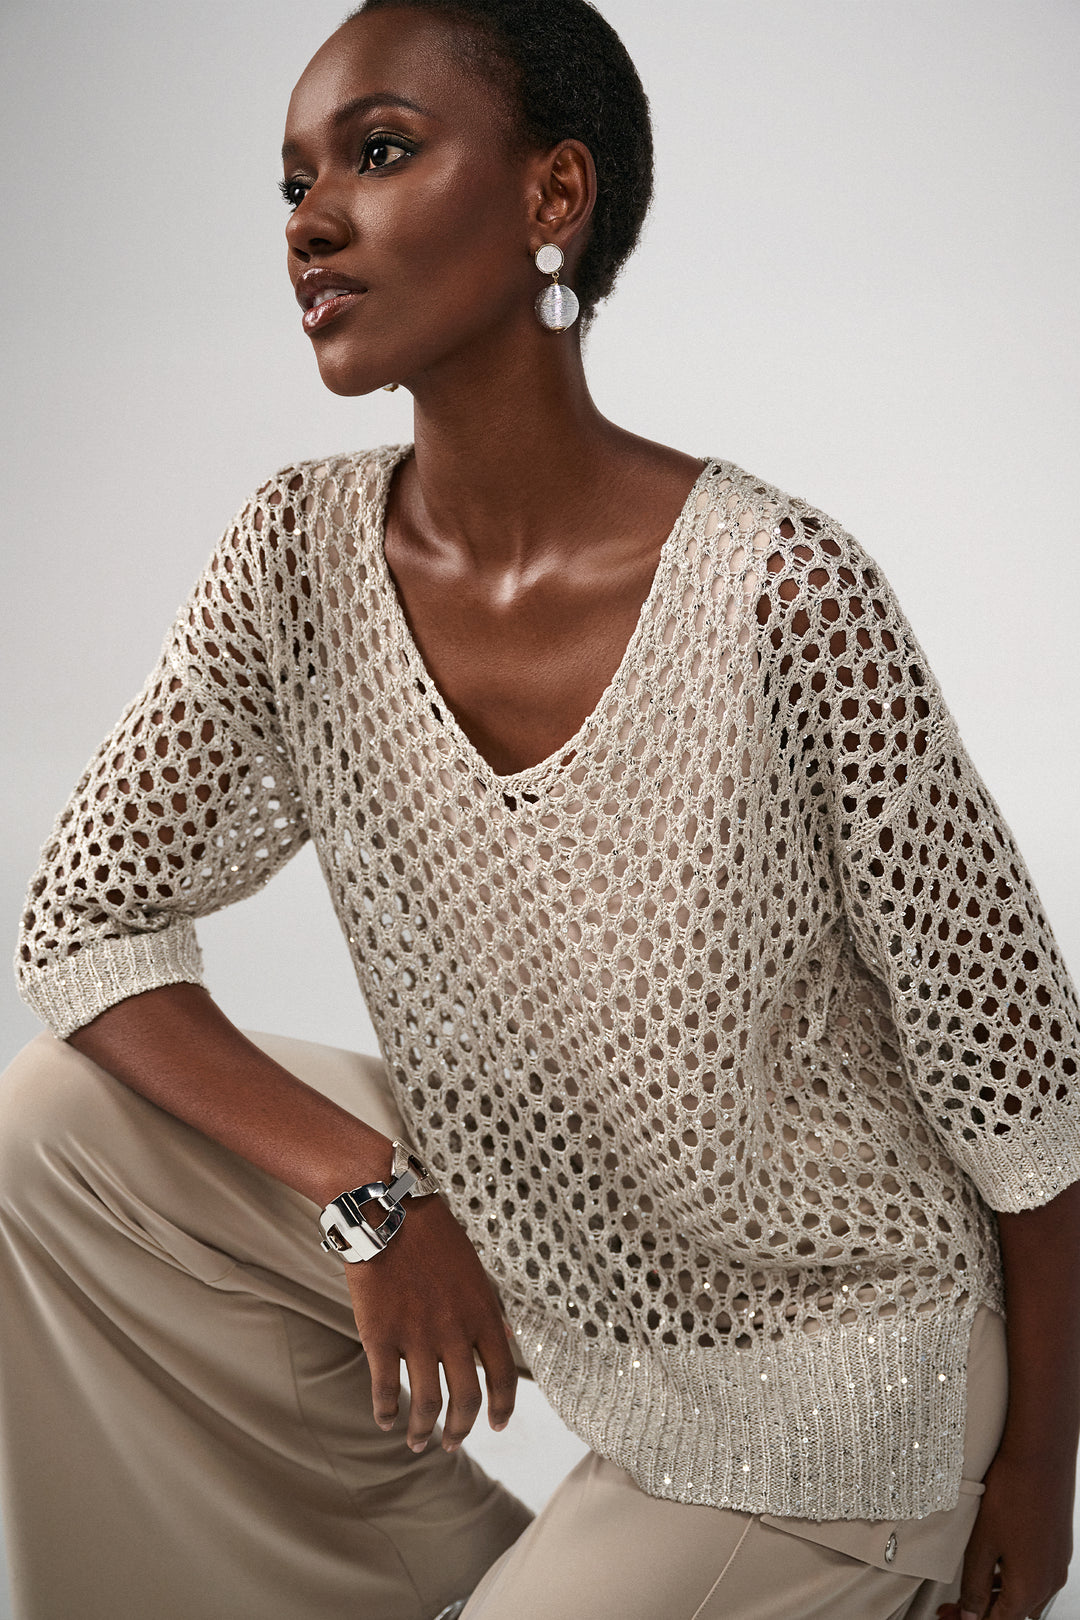 Indulge in luxury with our crochet top featuring intricate sequin detailing.